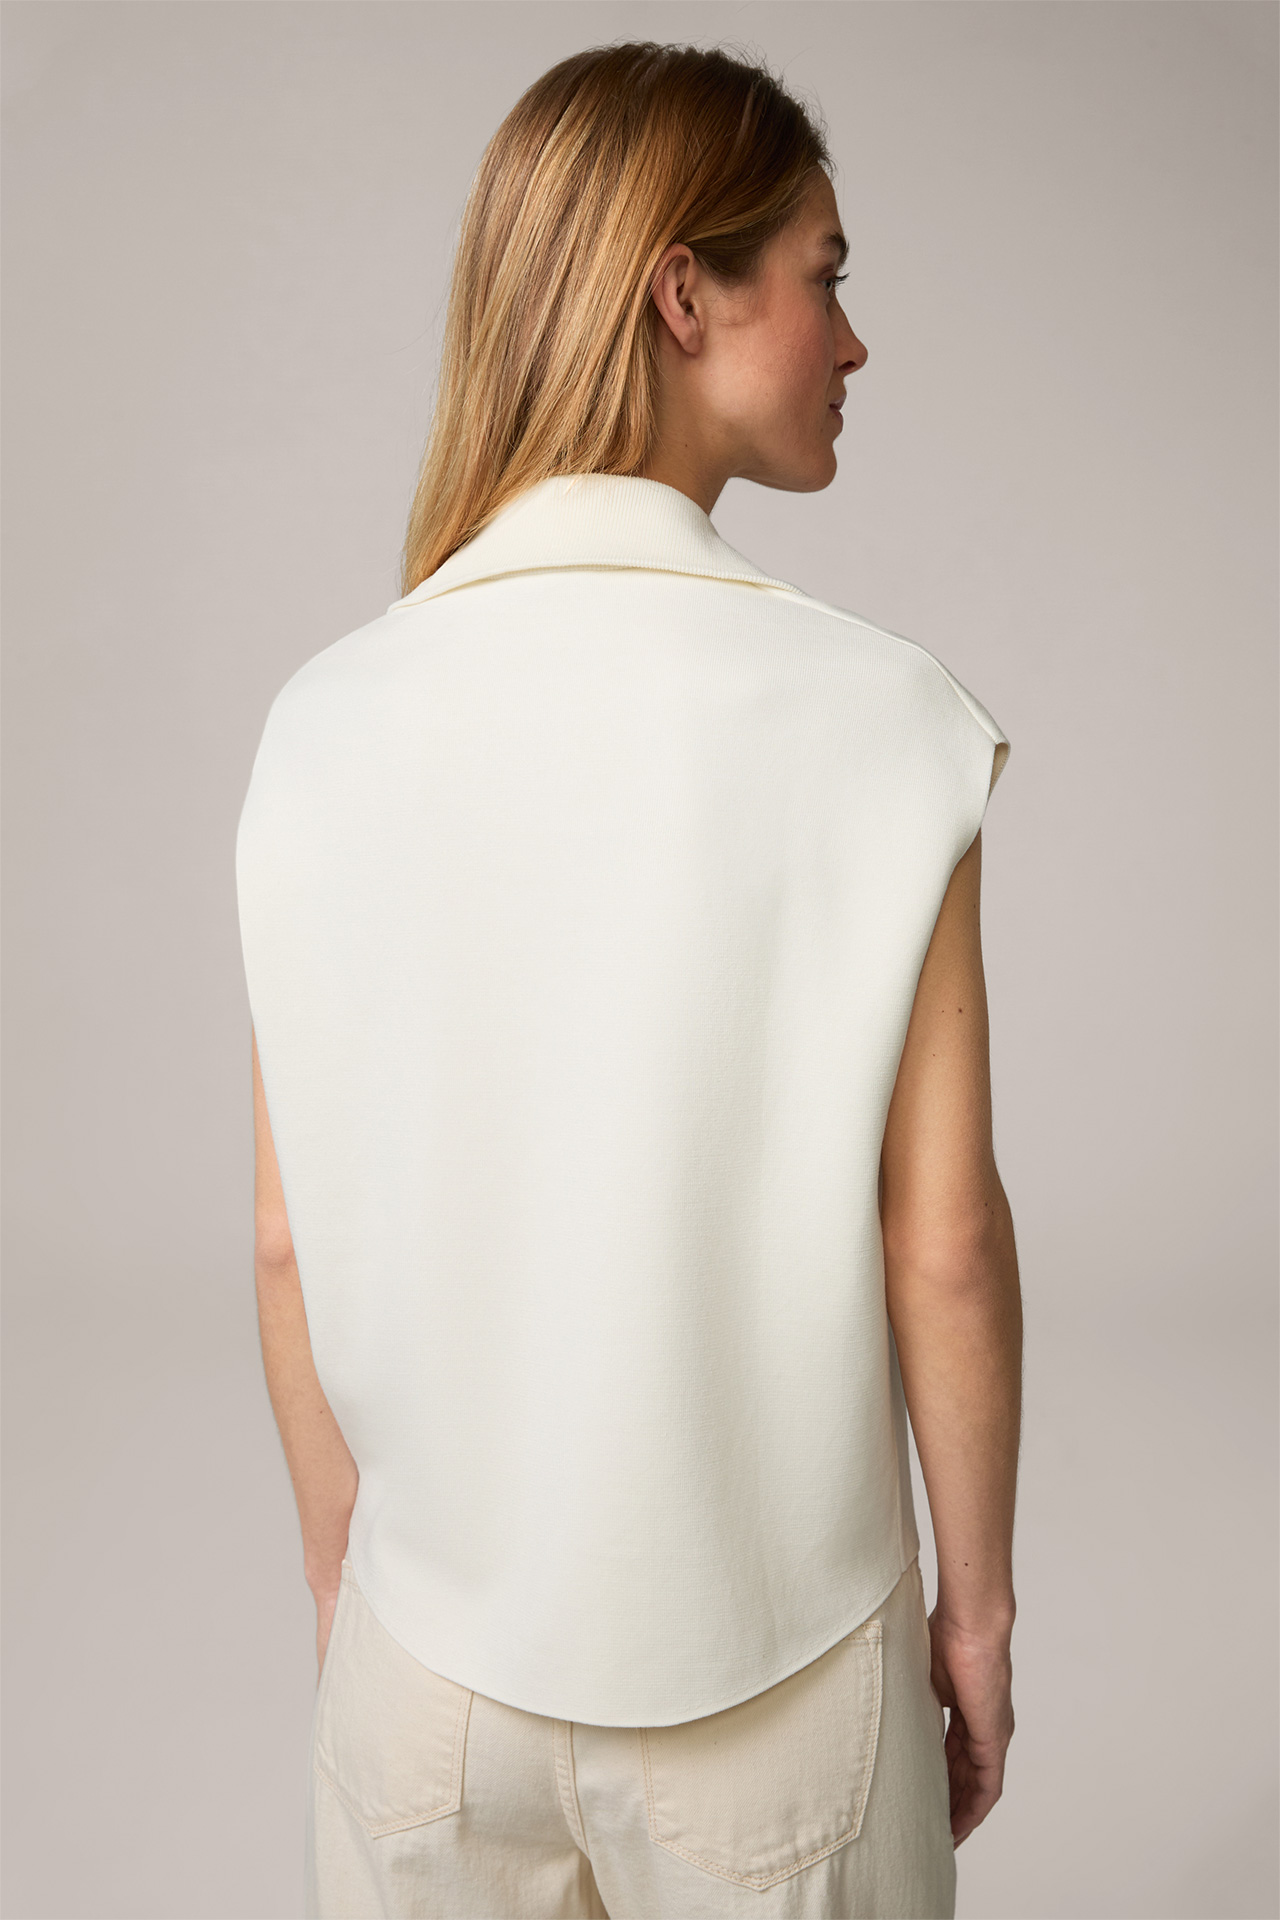 Baumwollmix-Double-Strick-Top in Creme